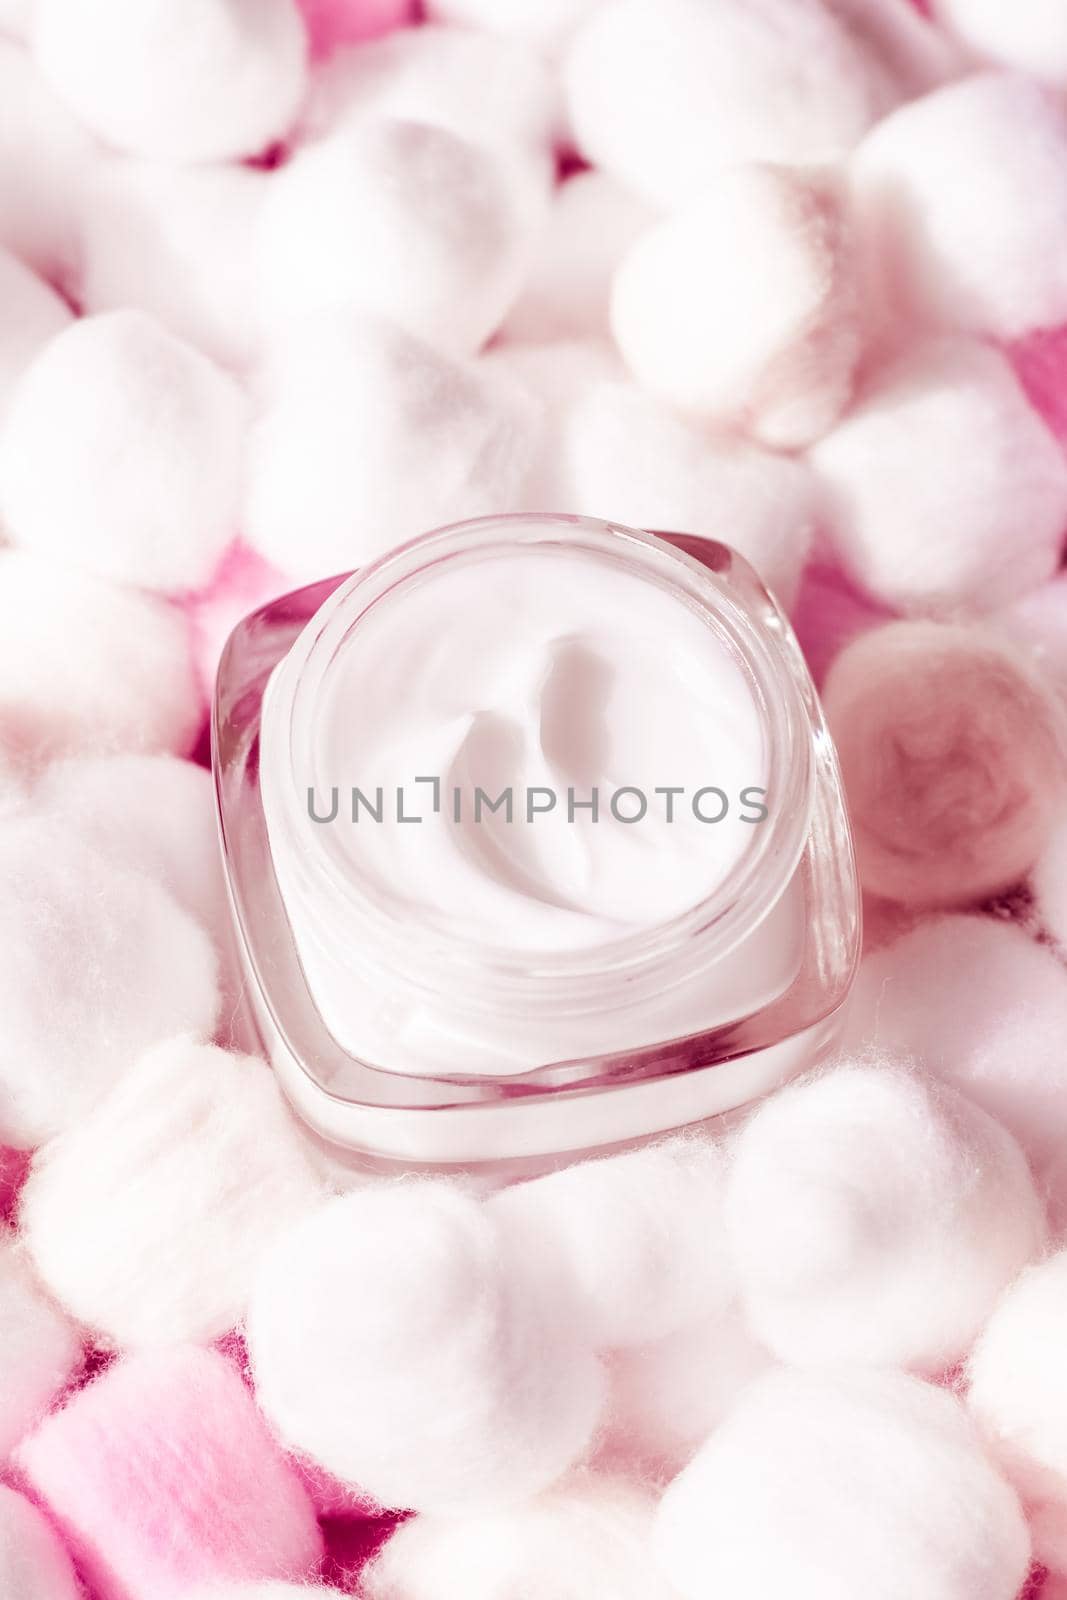 Cosmetic branding, moisturizing emulsion and facial care concept - Luxury face cream for sensitive skin and pink cotton balls on background, spa cosmetics and natural skincare beauty brand product